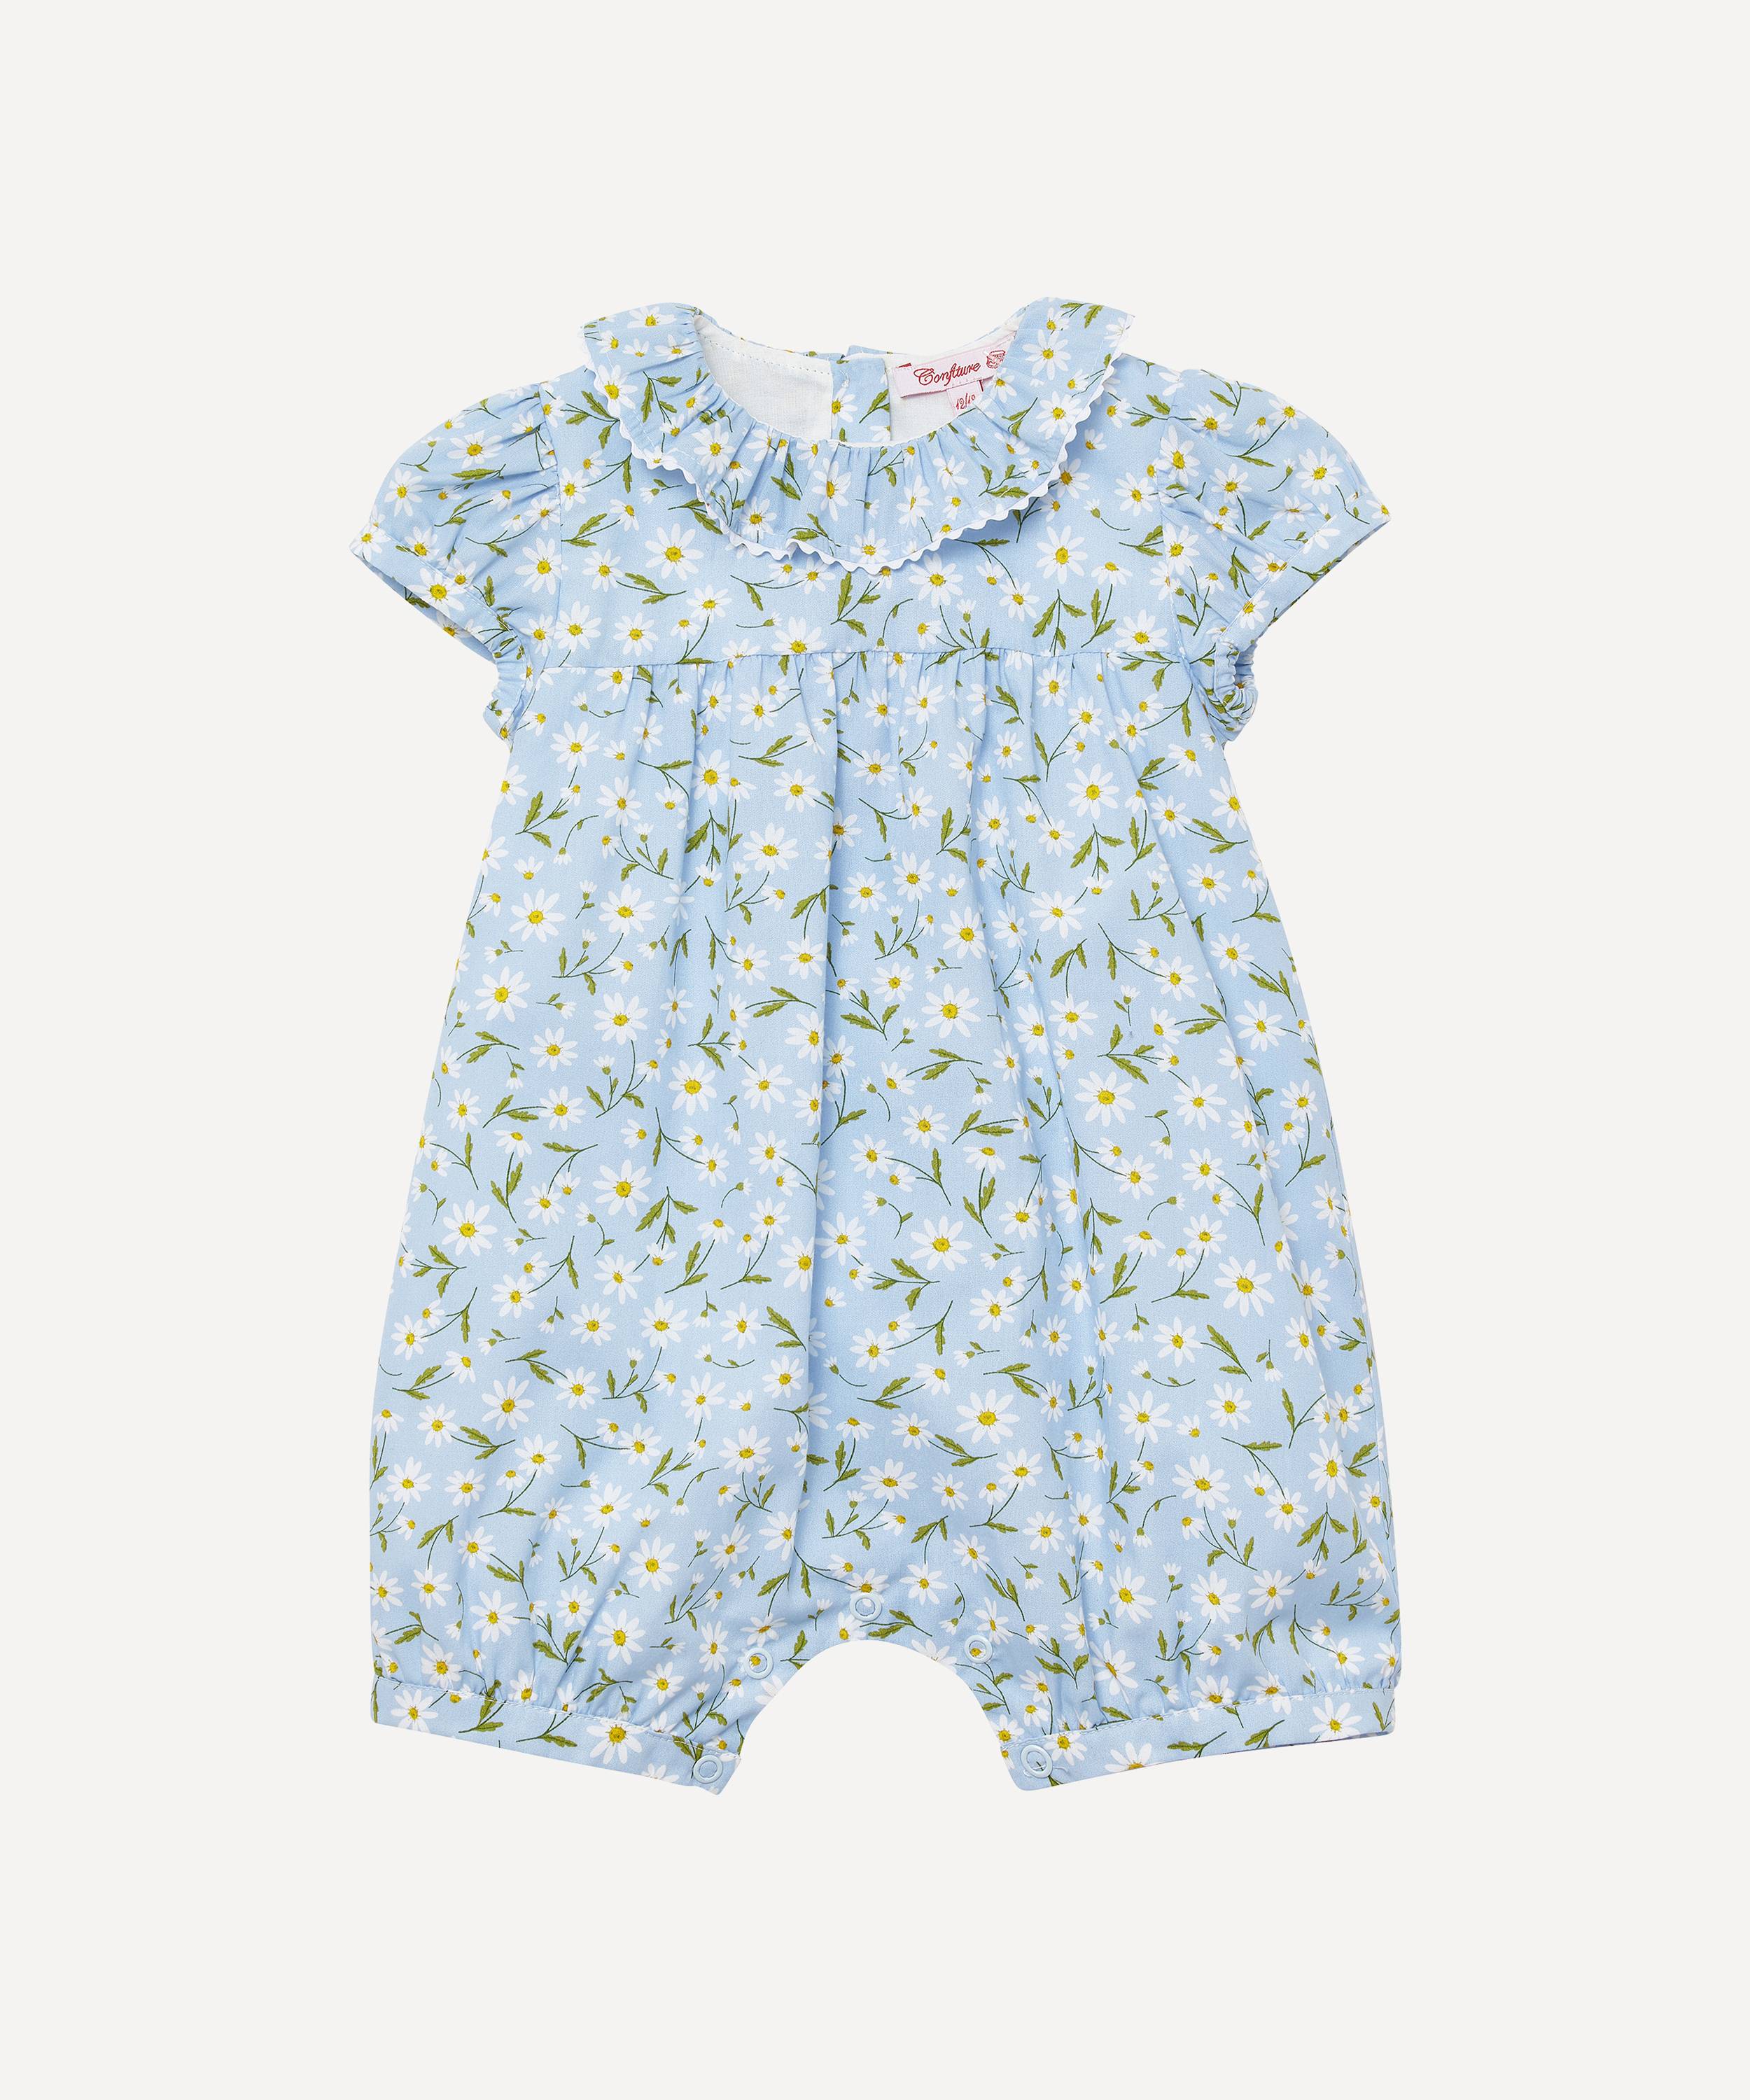 Trotters Catherine Daisy Romper 3-24 Months | Liberty